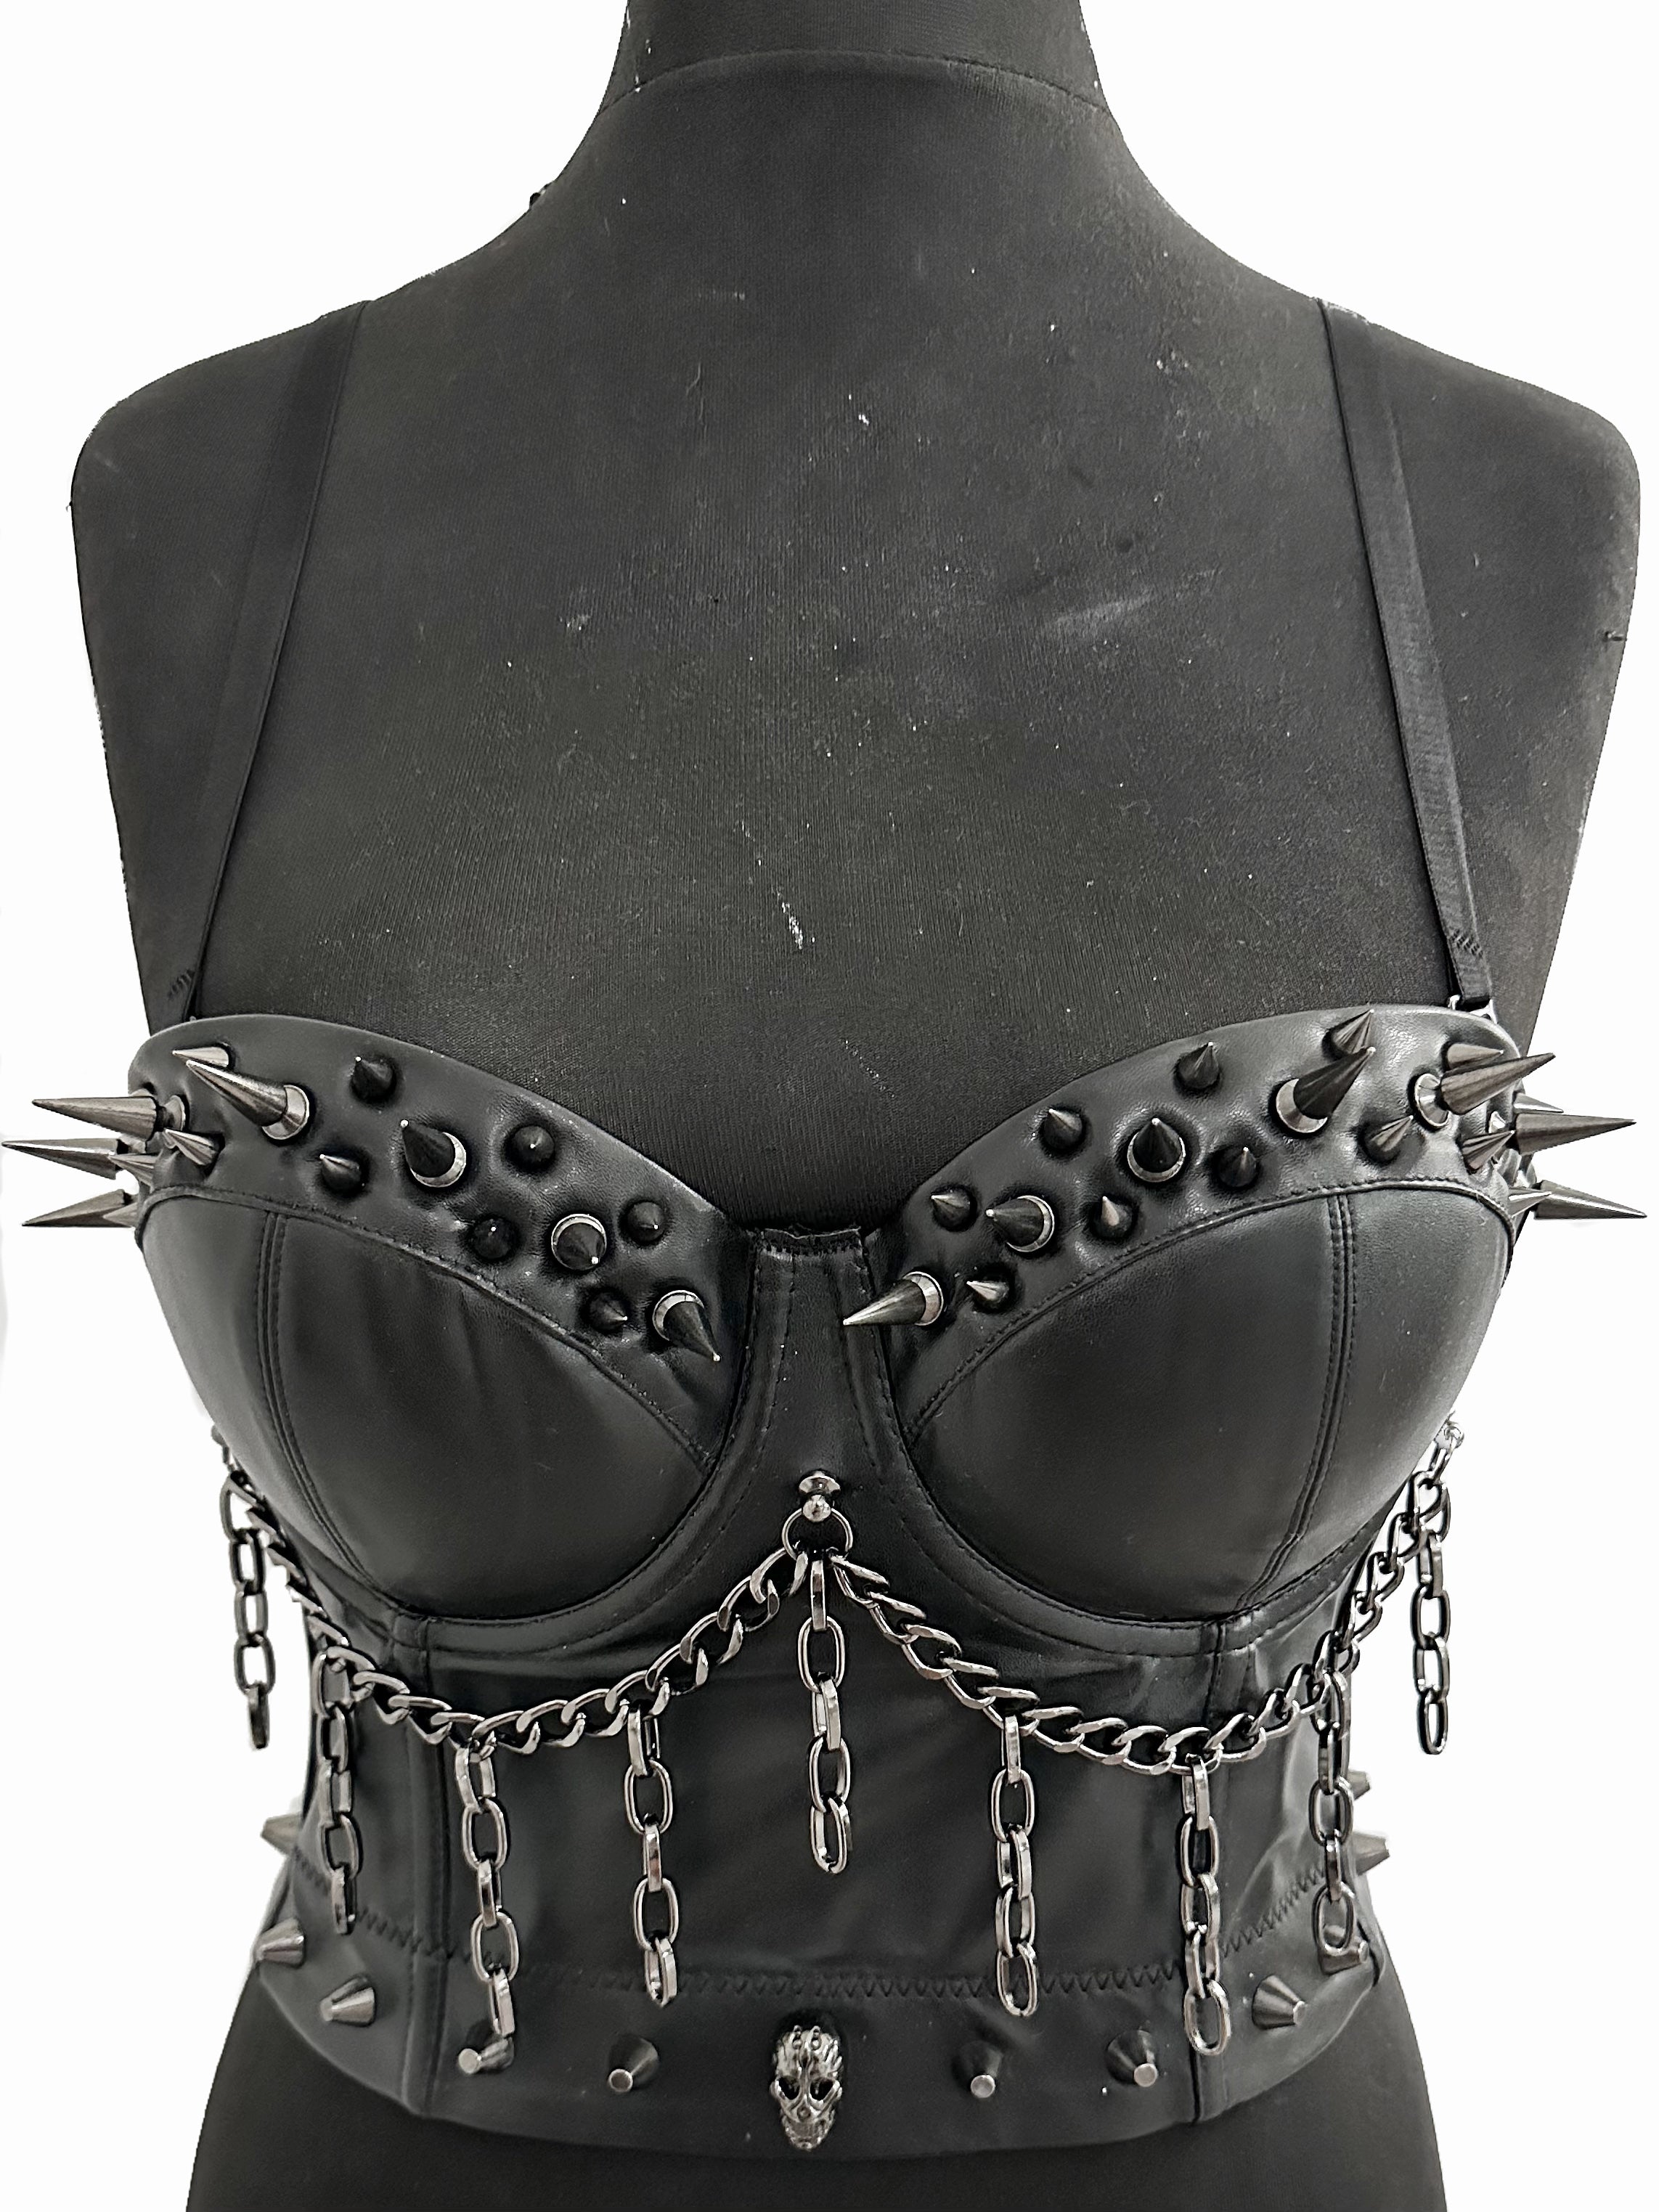 This top deserved its own post ⚔️ Top: “Saintly Spiked Corset